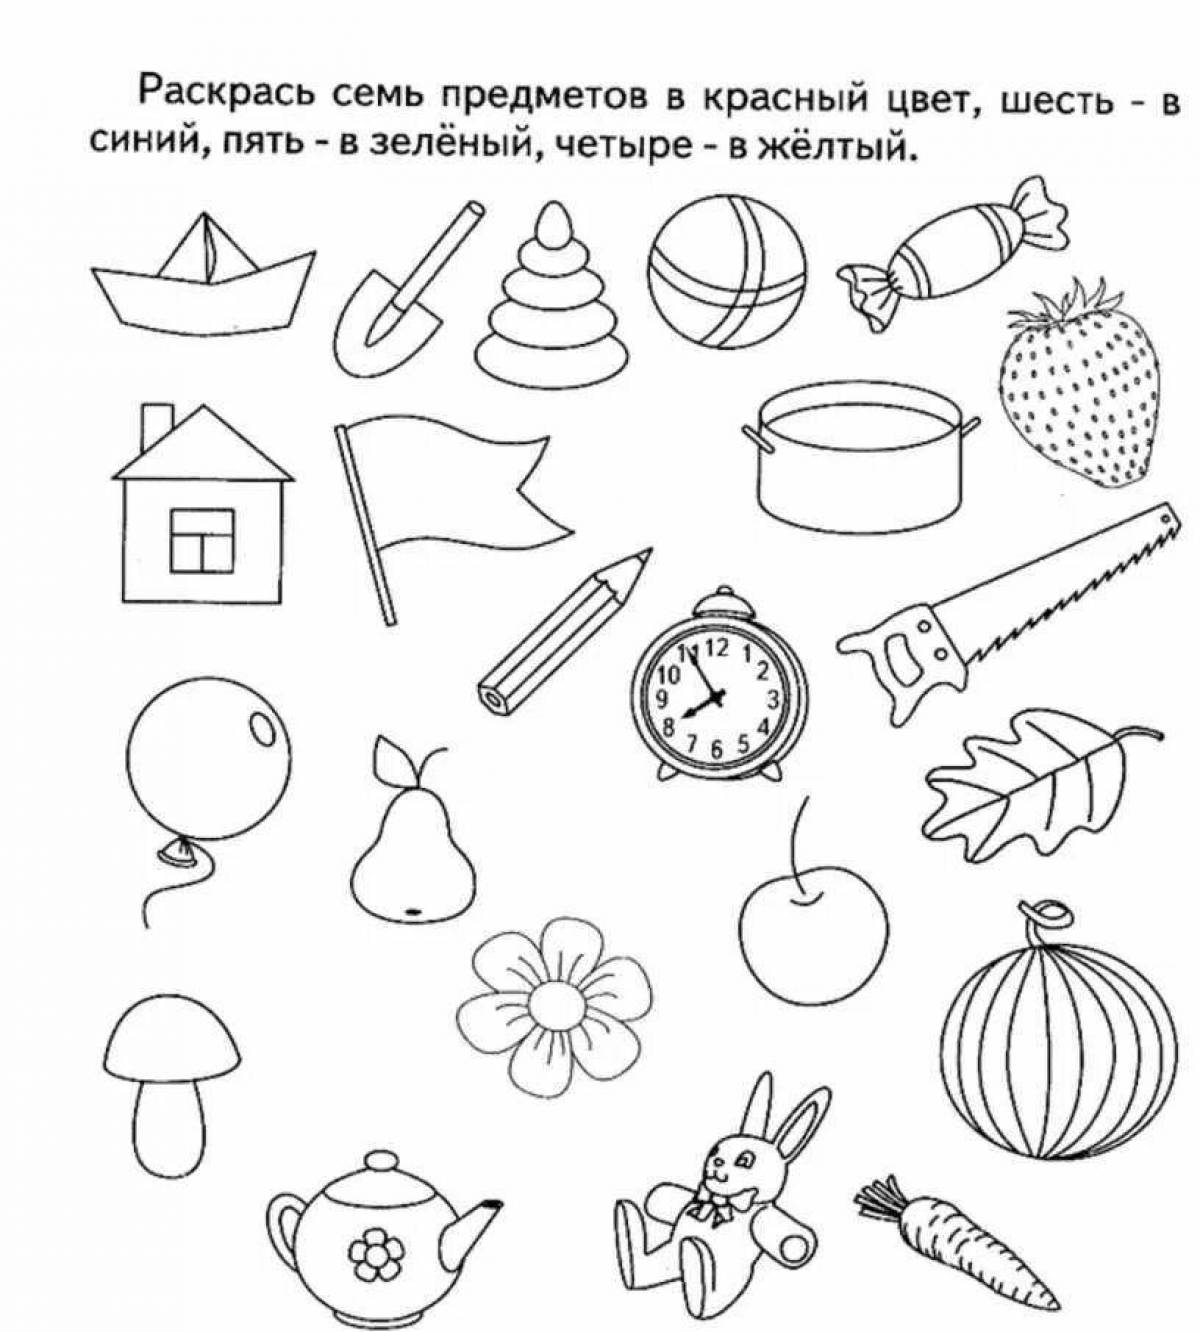 Brilliant coloring pages